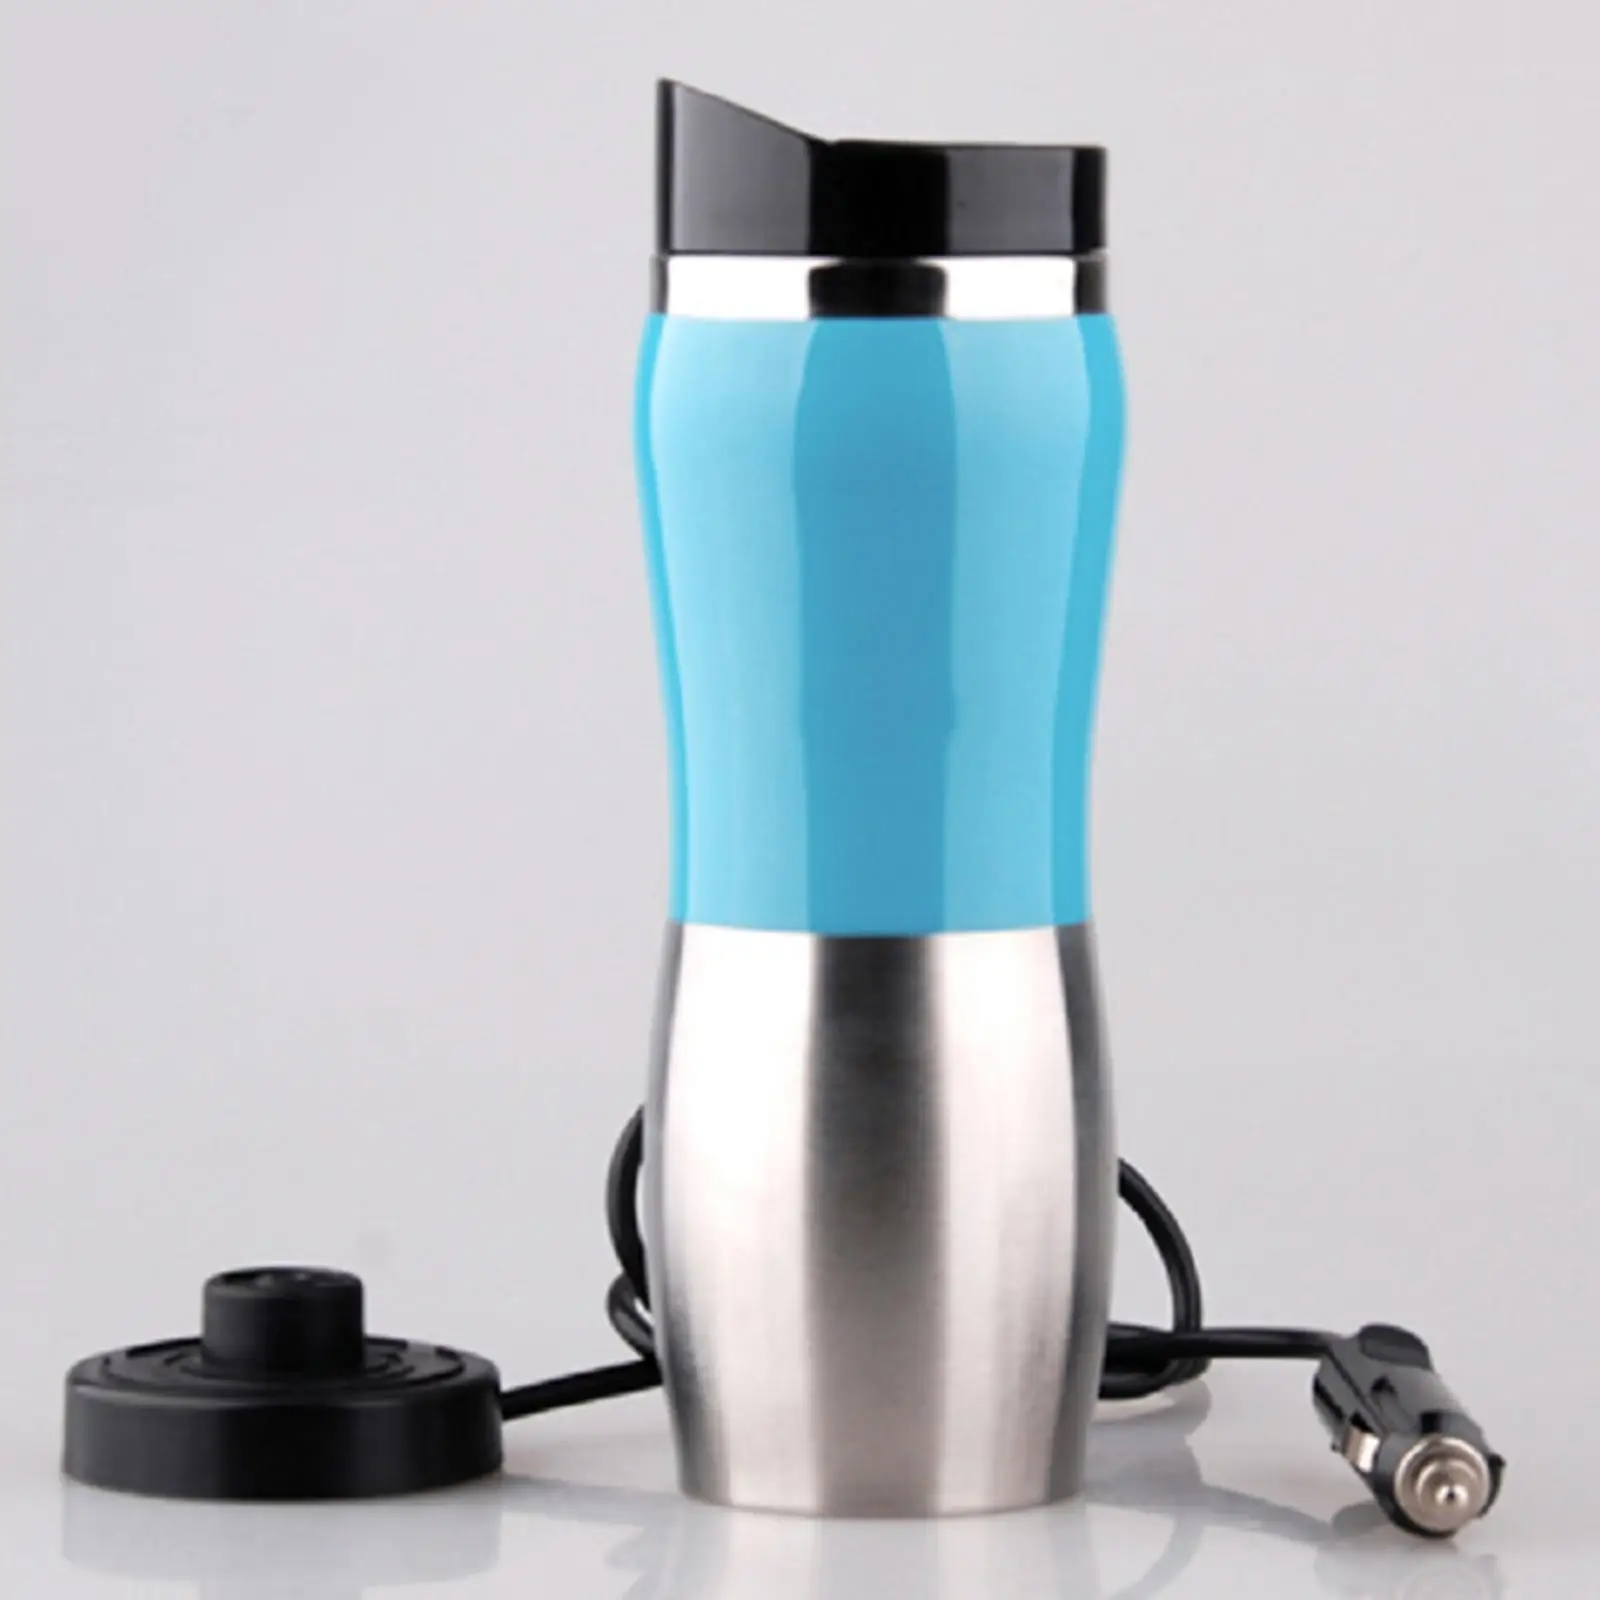  Kettle 24 V 400ml/ Portable /Stainless Steel/ Electric Car Water Heater/ Auto Heating Bottle for Hot Water Coffee Making Milk